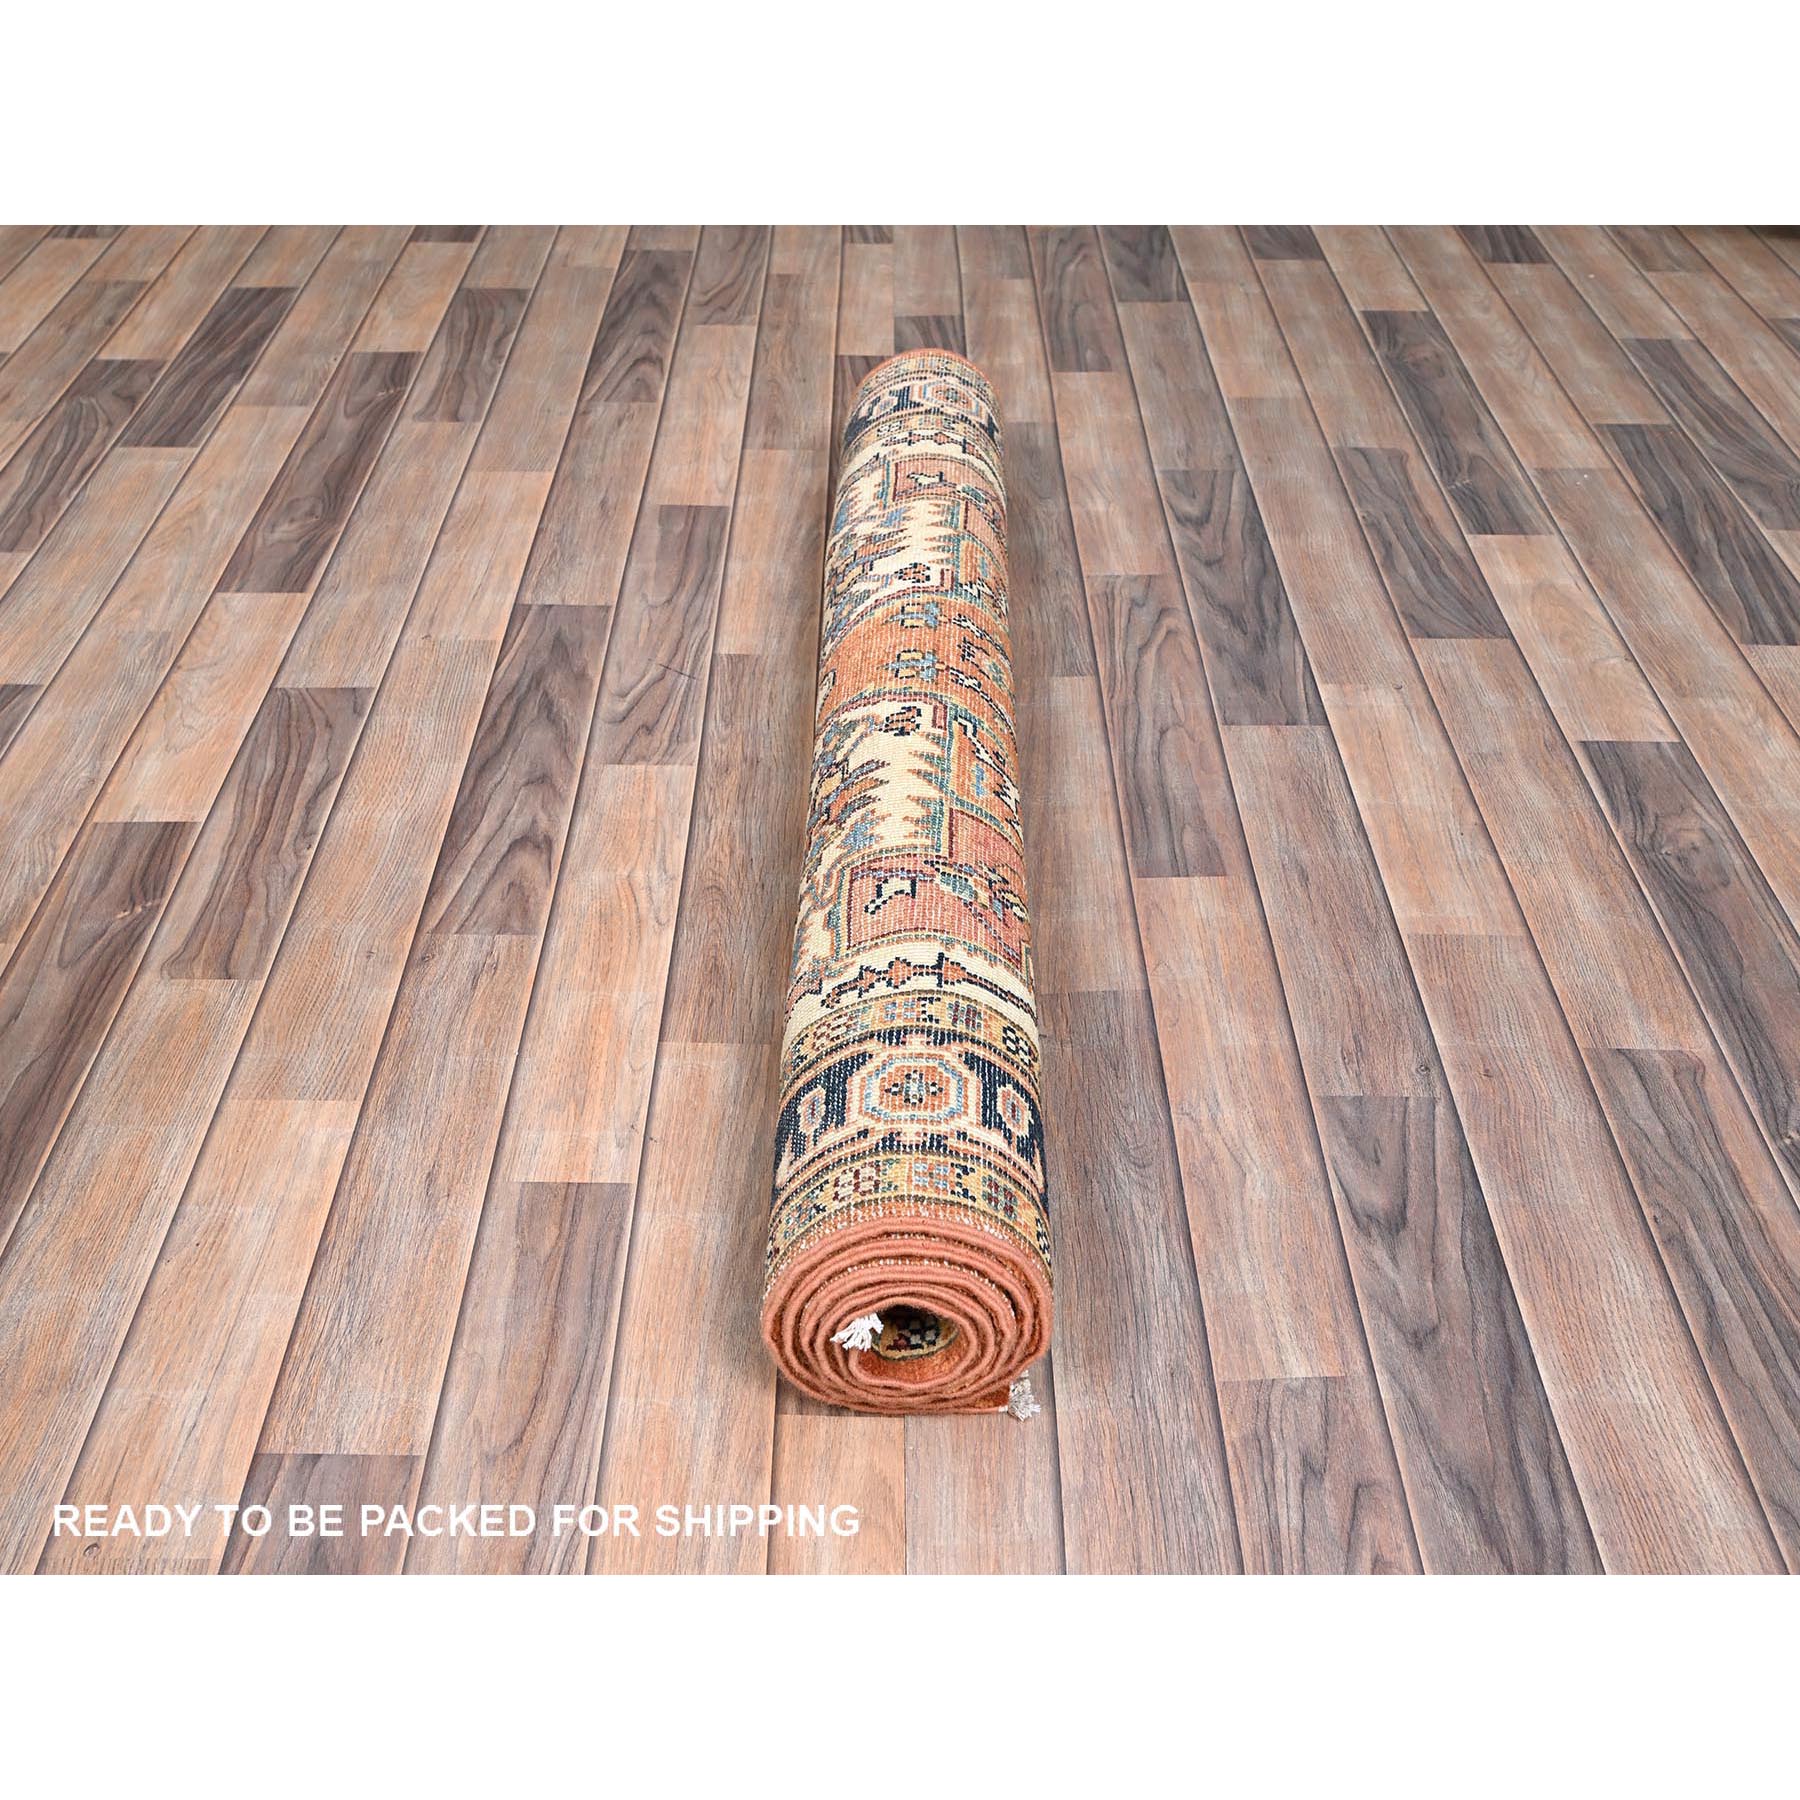 Hand Knotted Decorative Rugs Area Rug > Design# CCSR85490 > Size: 4'-0" x 6'-1"